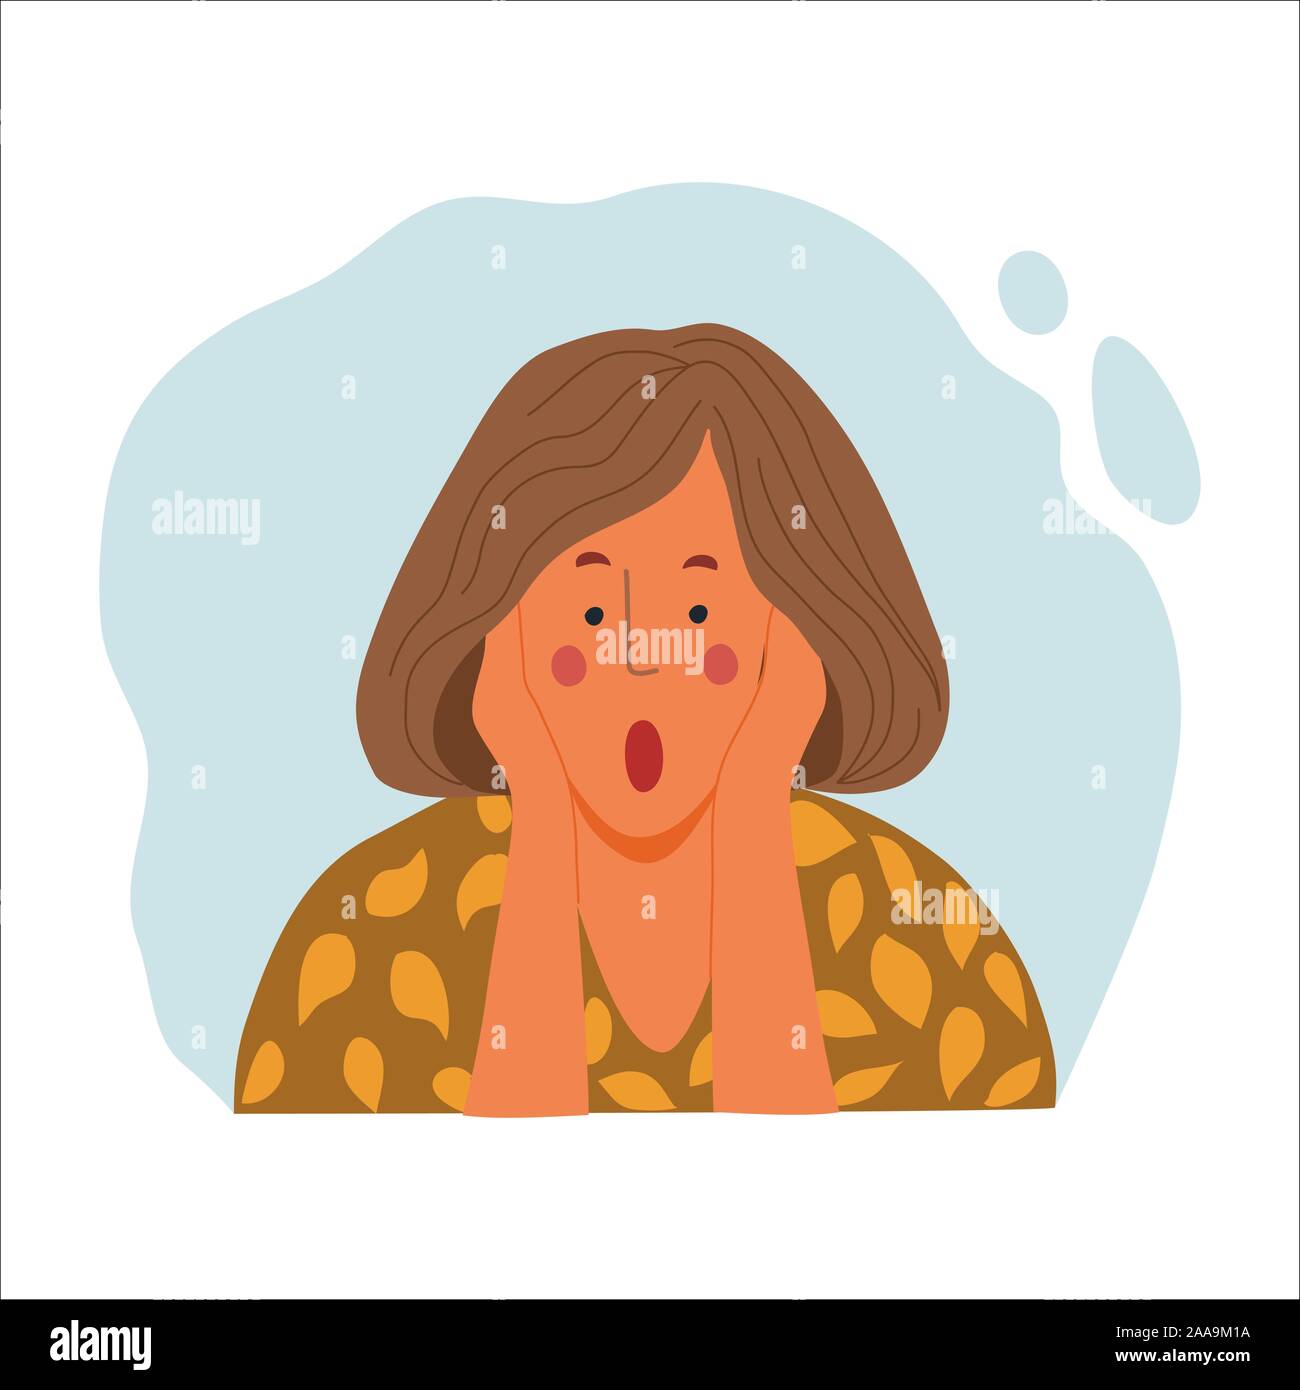 Women emotional portrait, hand drawn flat style design concept illustration of terrified girl, female face and hands avatar. Vector Stock Vector